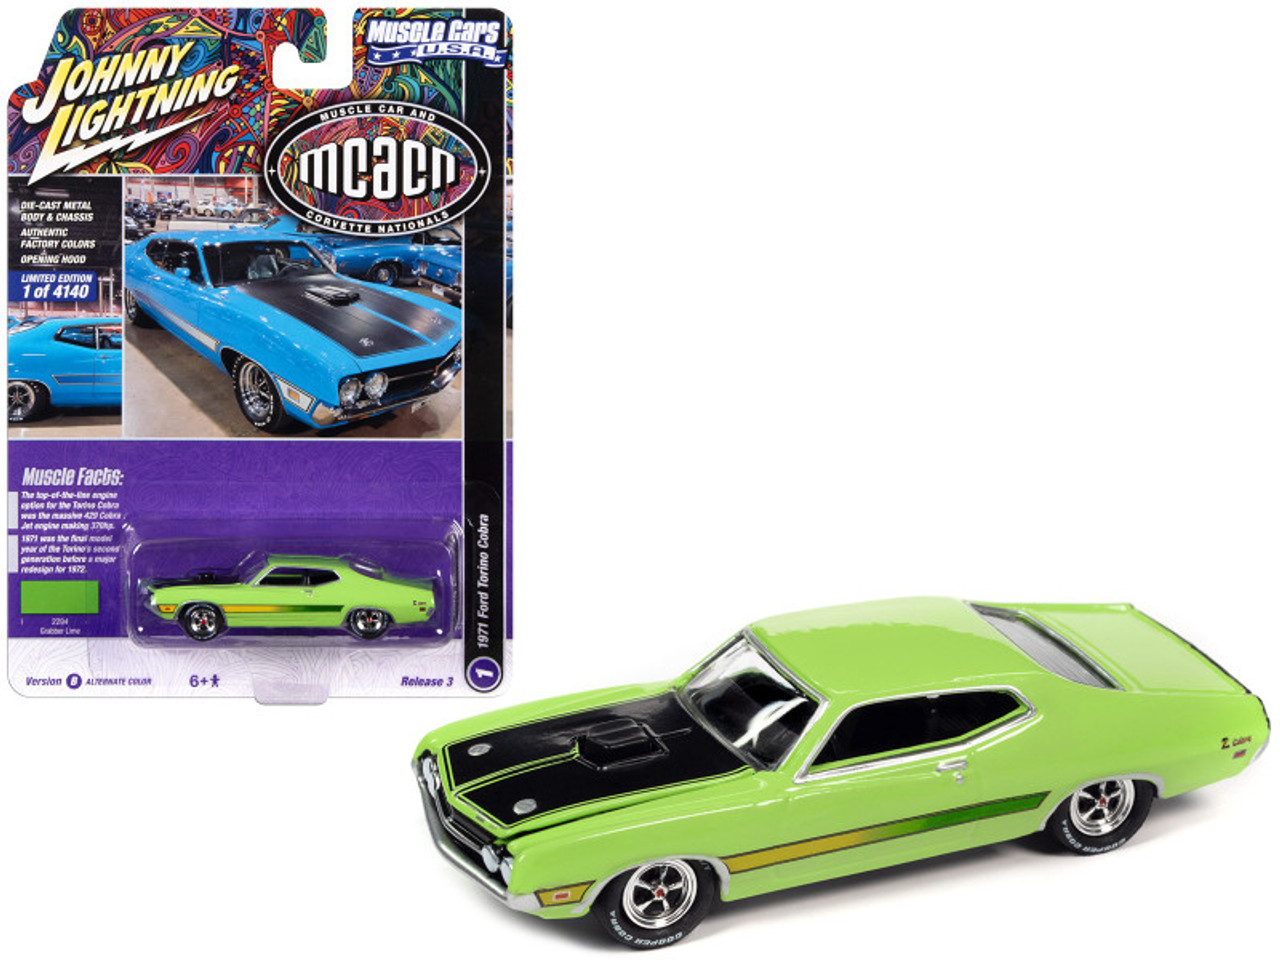 1971 Ford Torino Cobra Grabber Lime Green with Stripes "MCACN (Muscle Car and Corvette Nationals)" Limited Edition to 4140 pieces Worldwide "Muscle Cars USA" Series 1/64 Diecast Model Car by Johnny Lightning